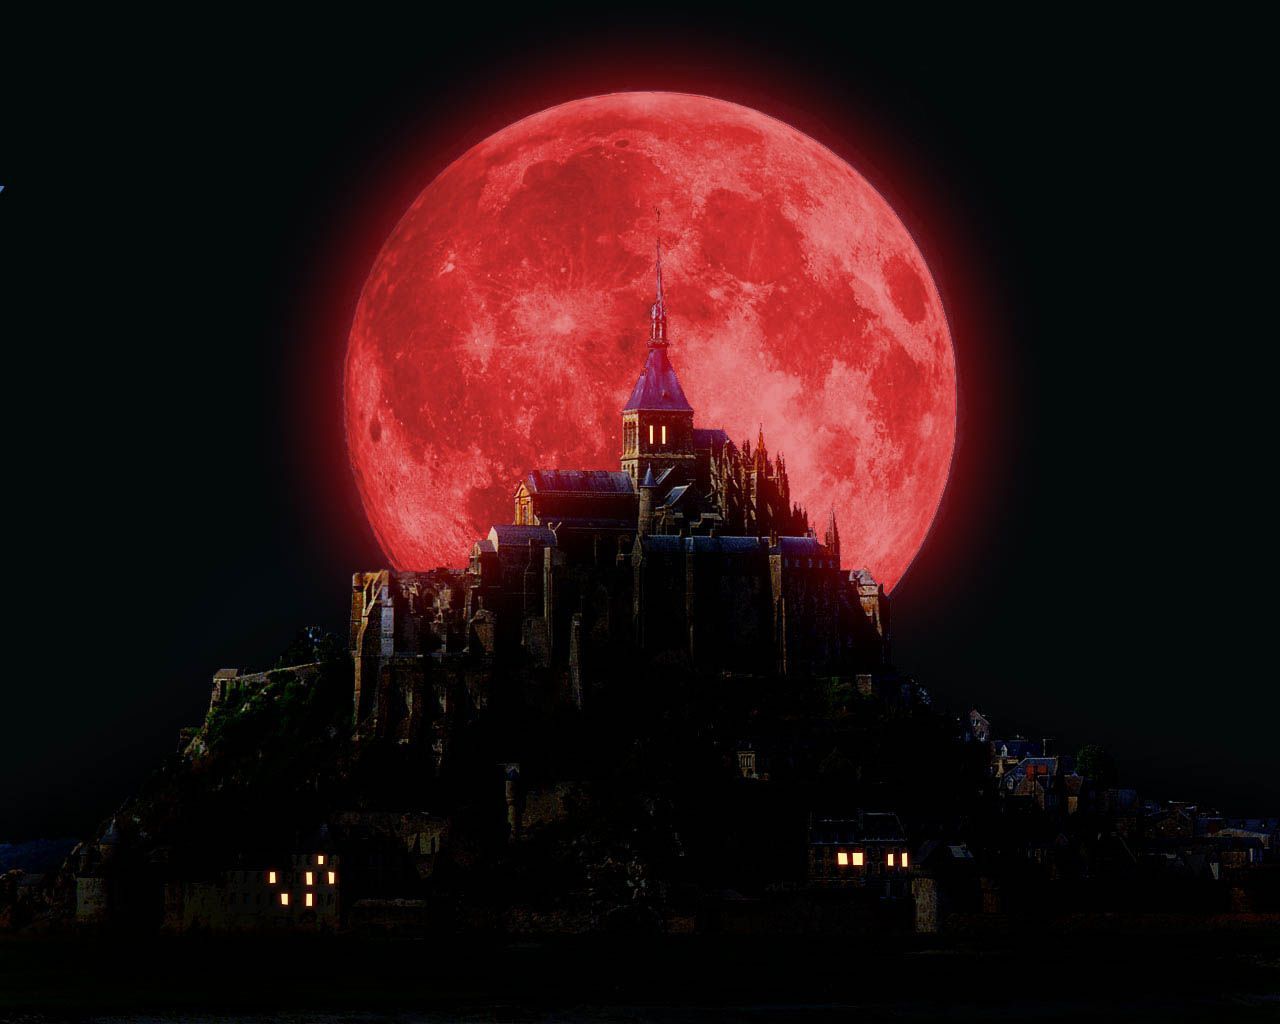 A red full moon rising over a castle. - Vampire